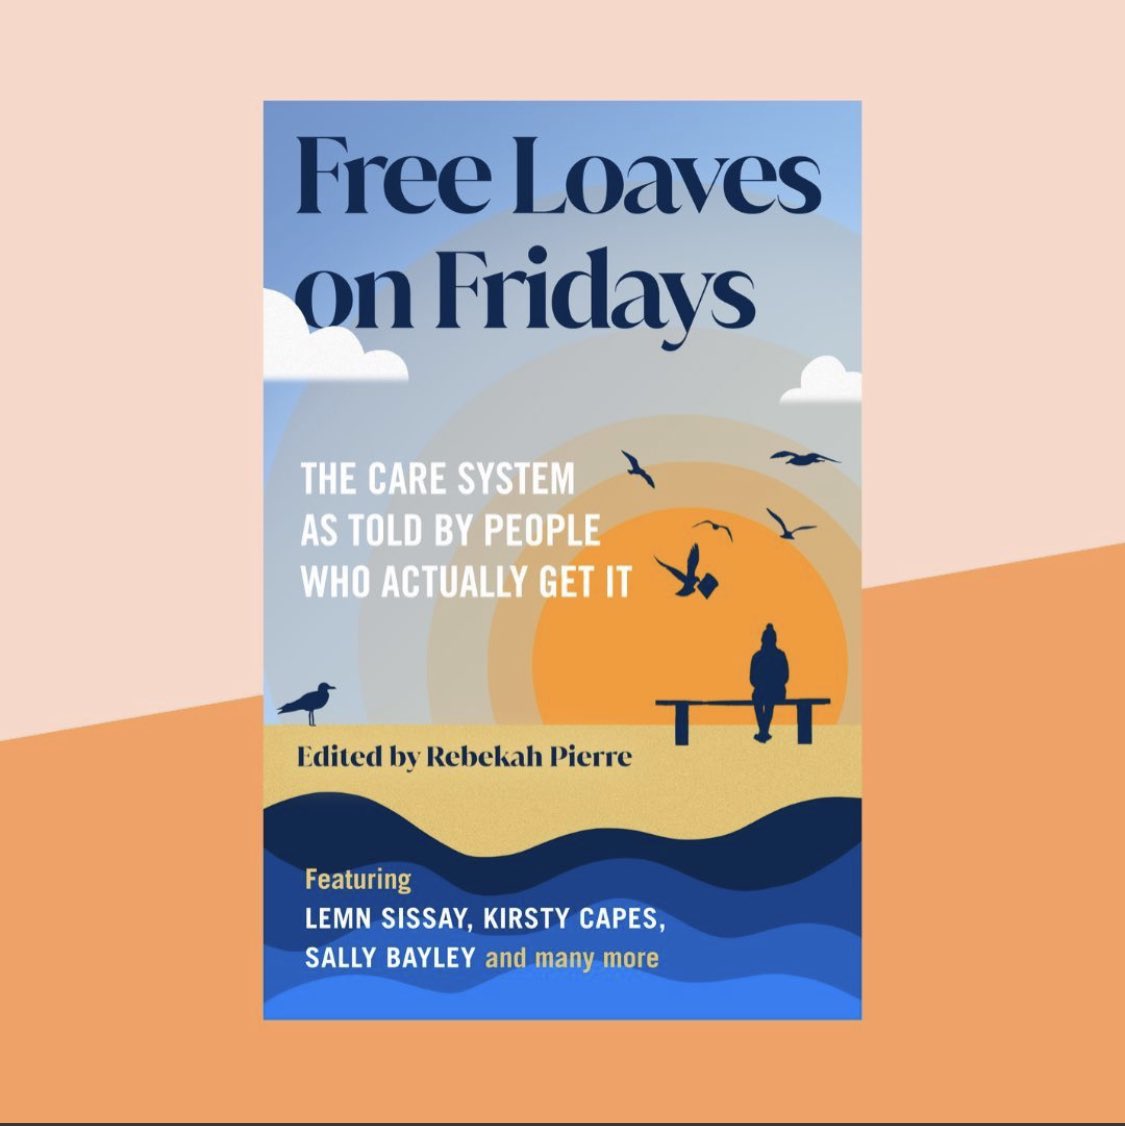 Cover of Free Loves on Friday which has an illustration of a young person's silhouette sat on a bench in front of a sunset with birds flying above them.